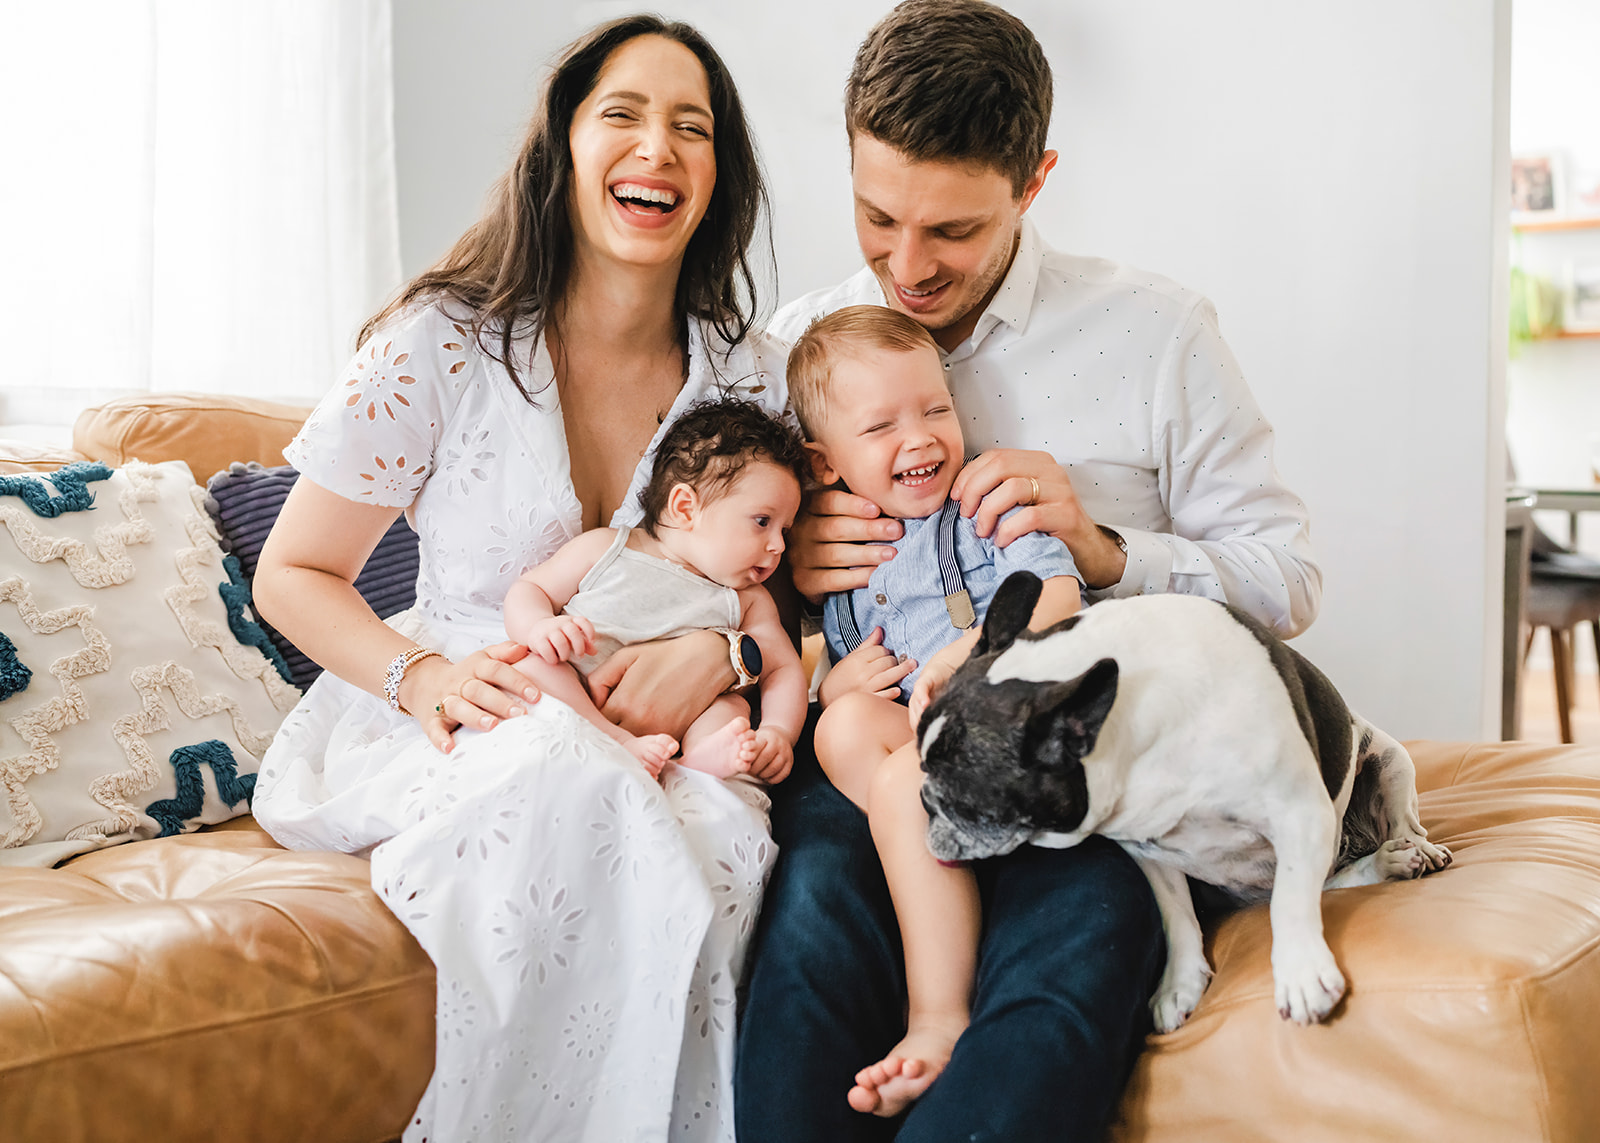 New York City family at home with newborn and dog.